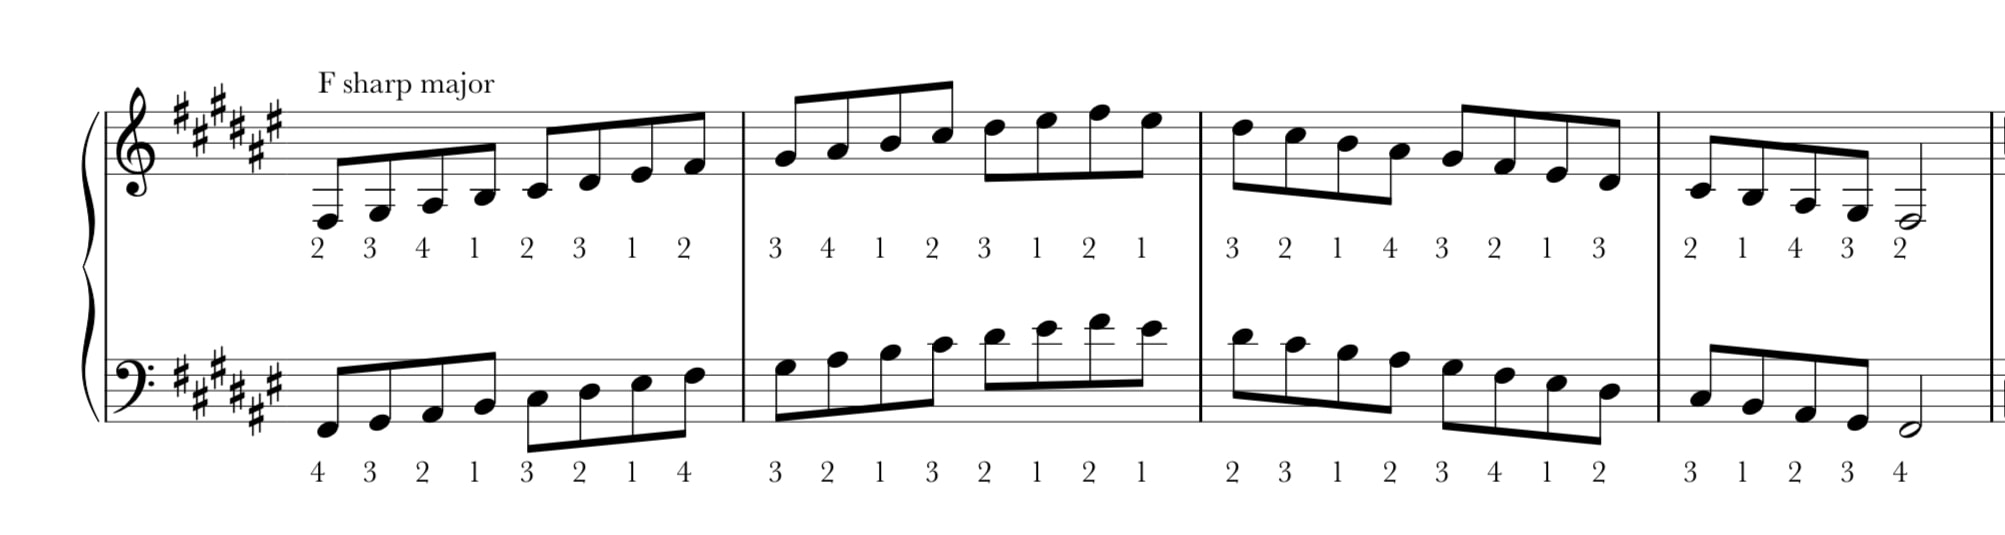 F# major scale notation for piano